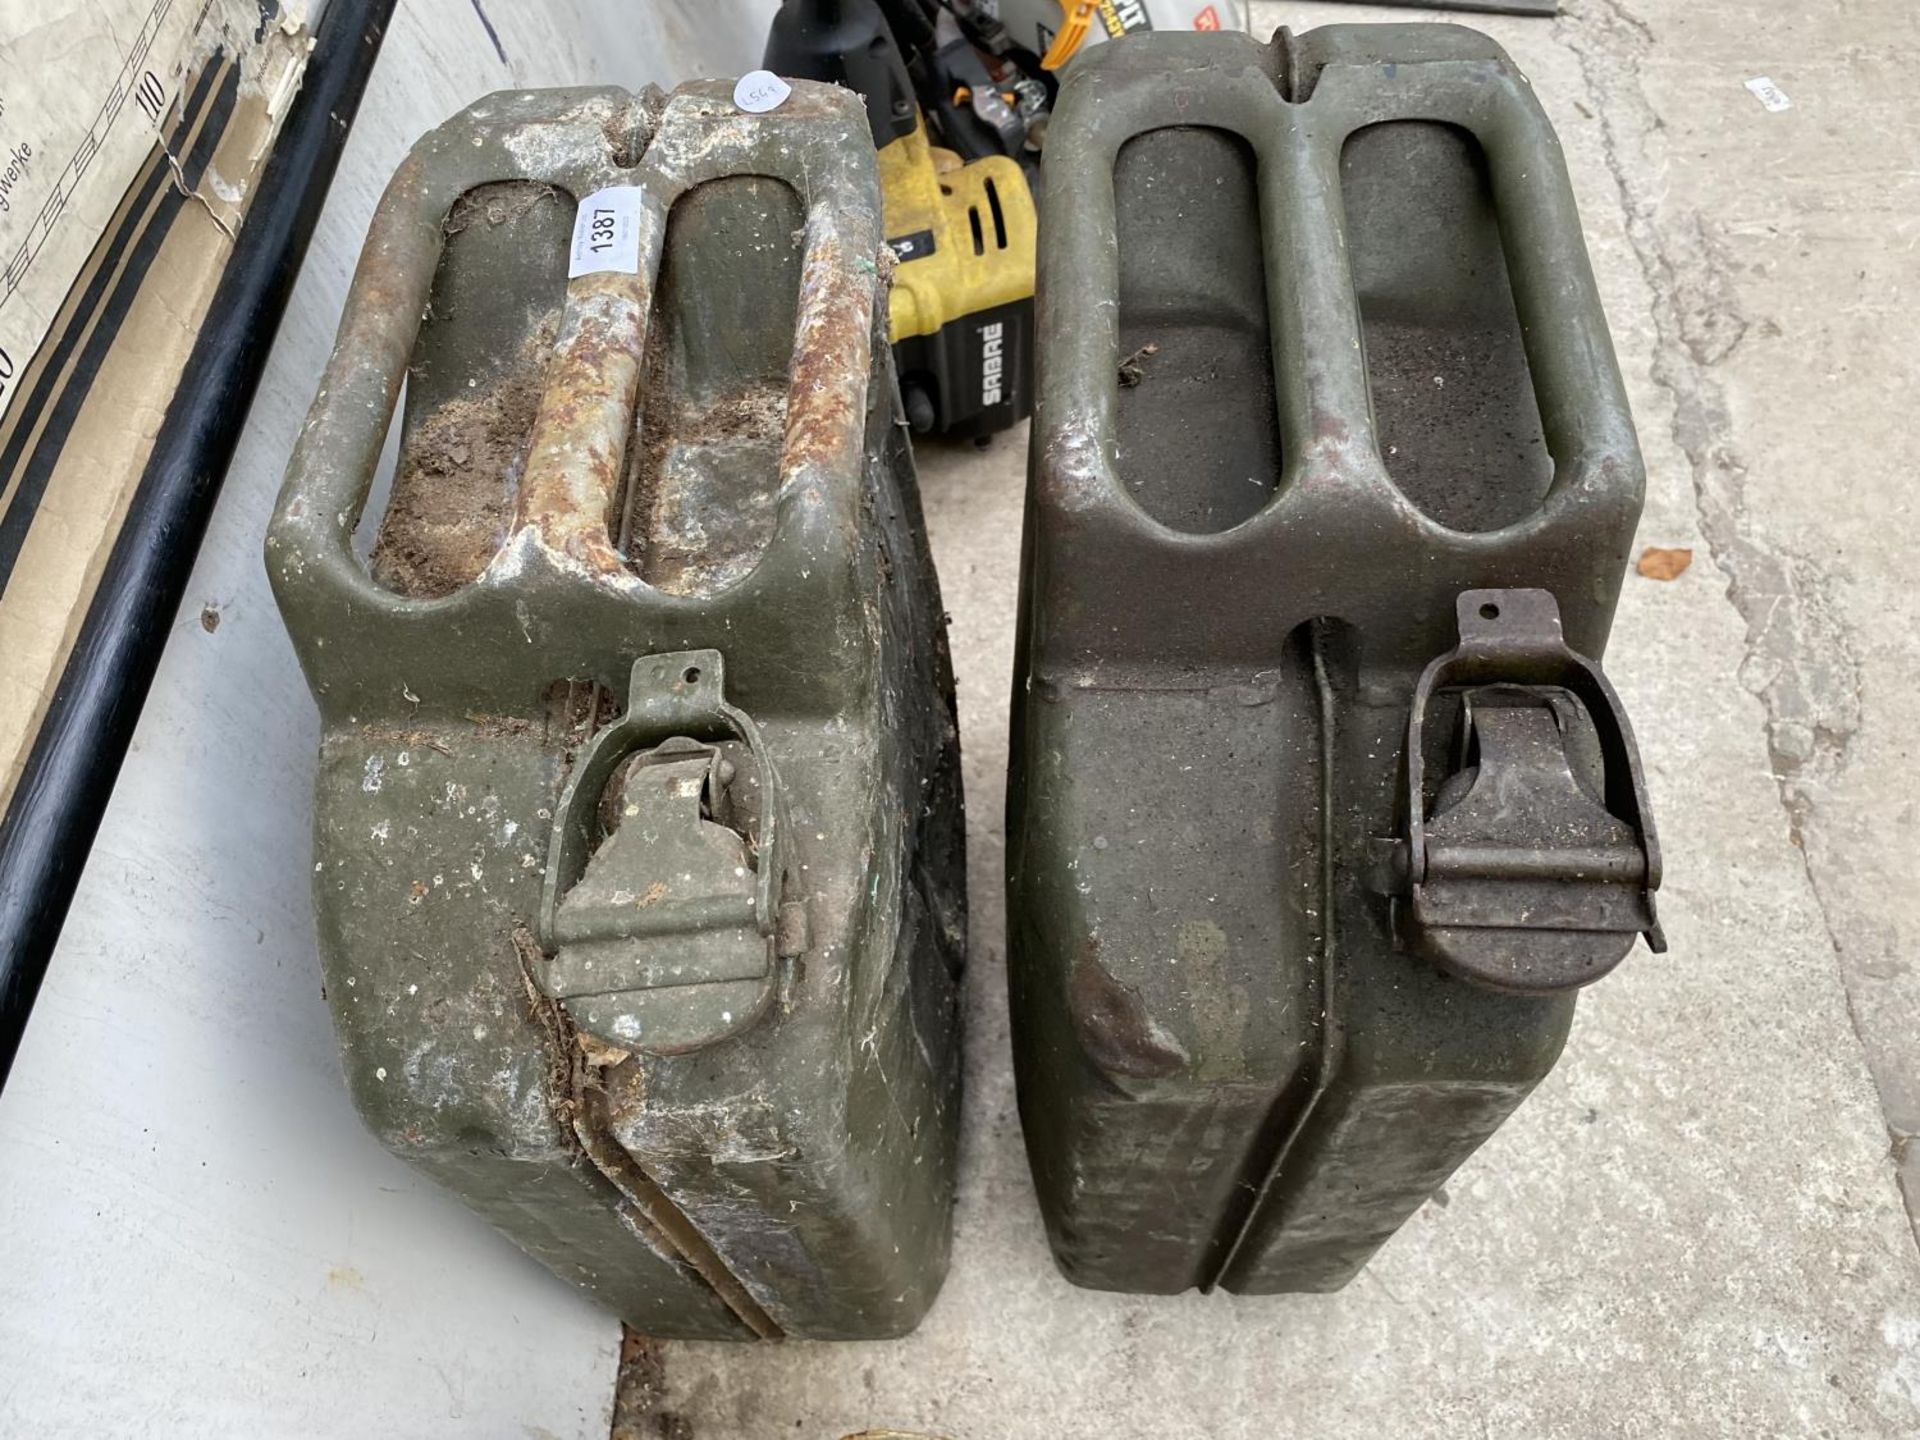 TWO VINTAGE METAL JERRY CANS - Image 2 of 2